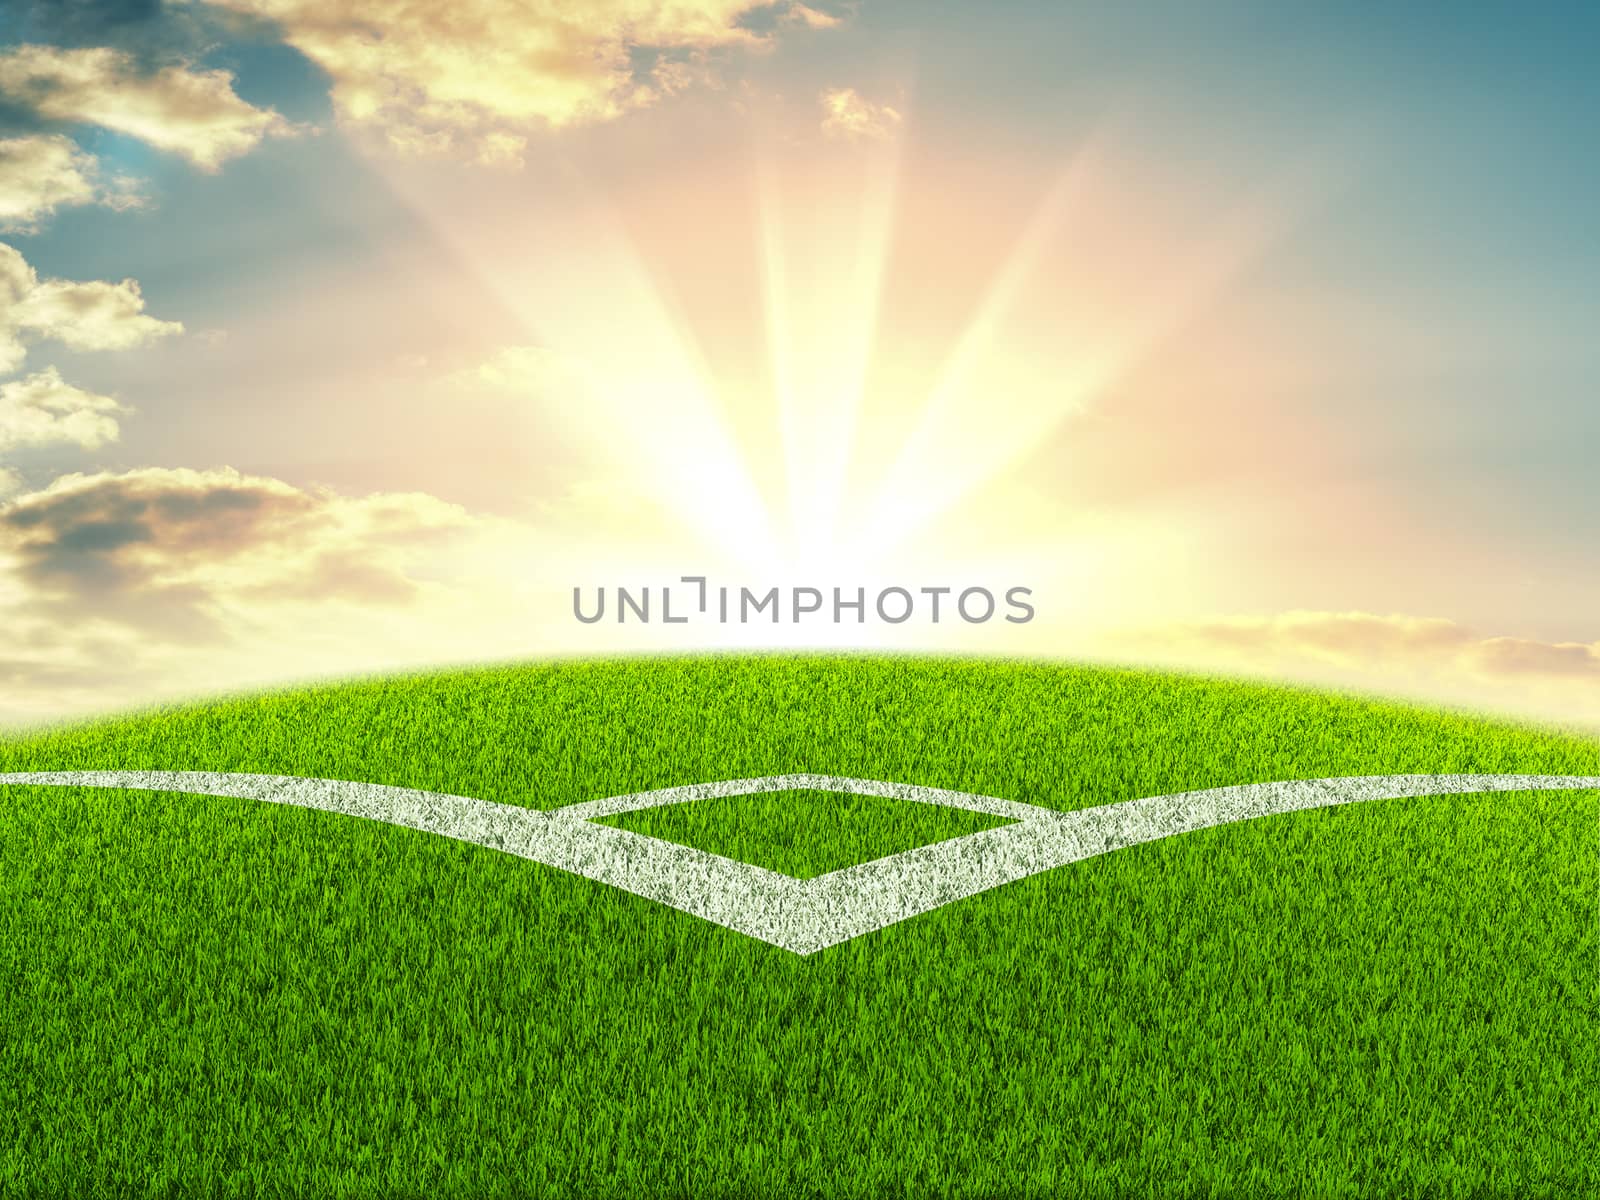 Football field on the background of sunrise or sunset. Marking the corner in the middle of the frame. 3d illustration